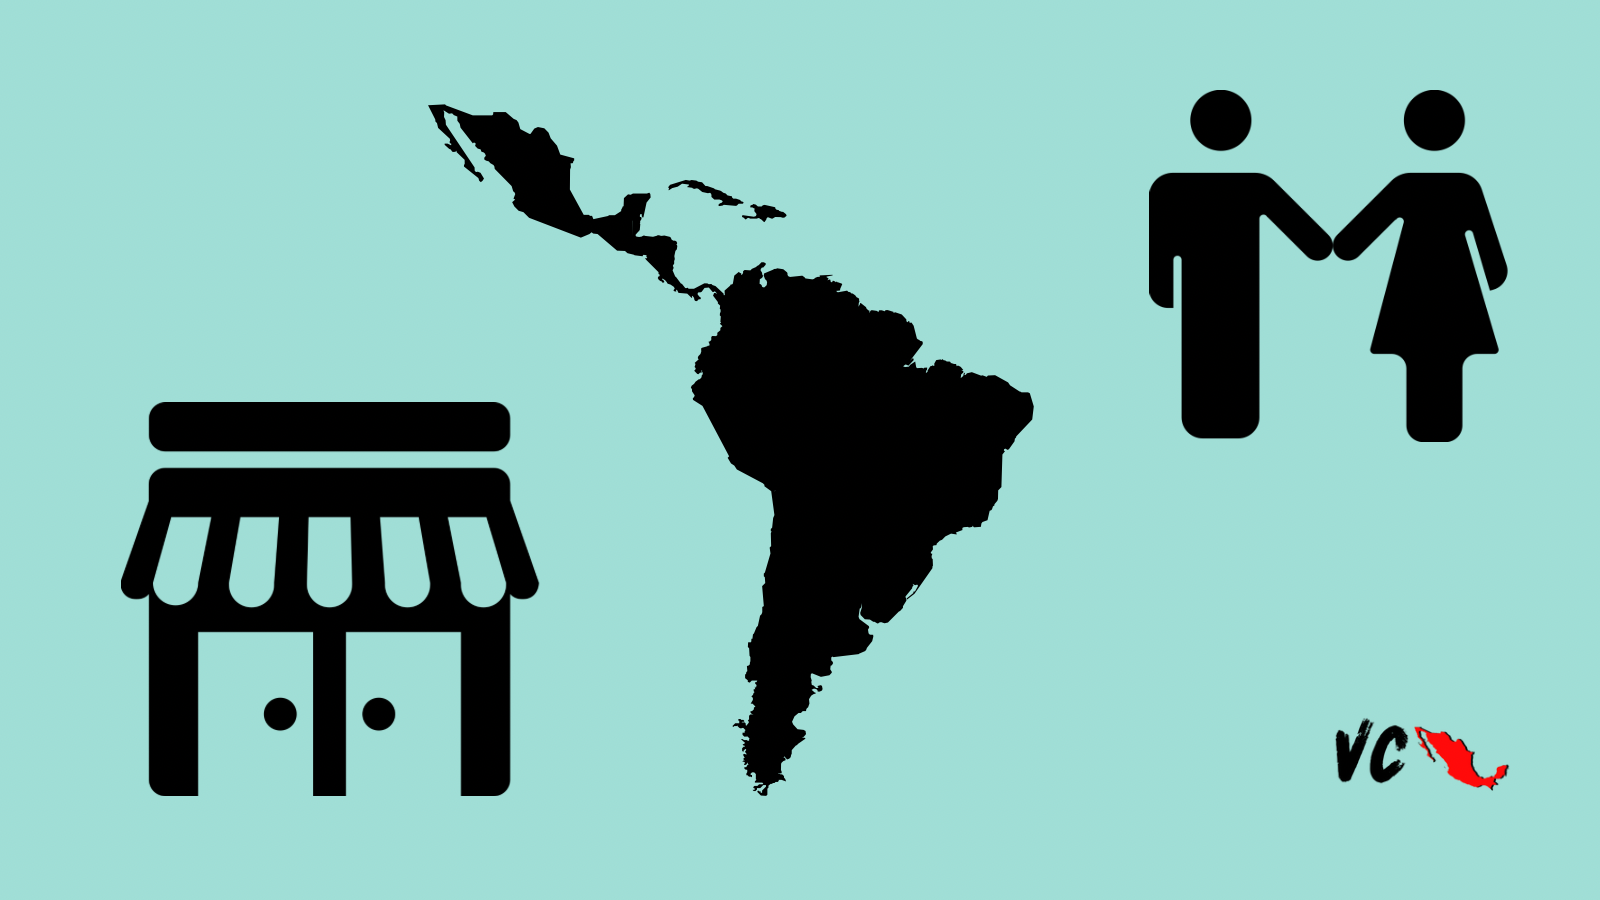 Why Startups, Tech, and VC in Latin America?